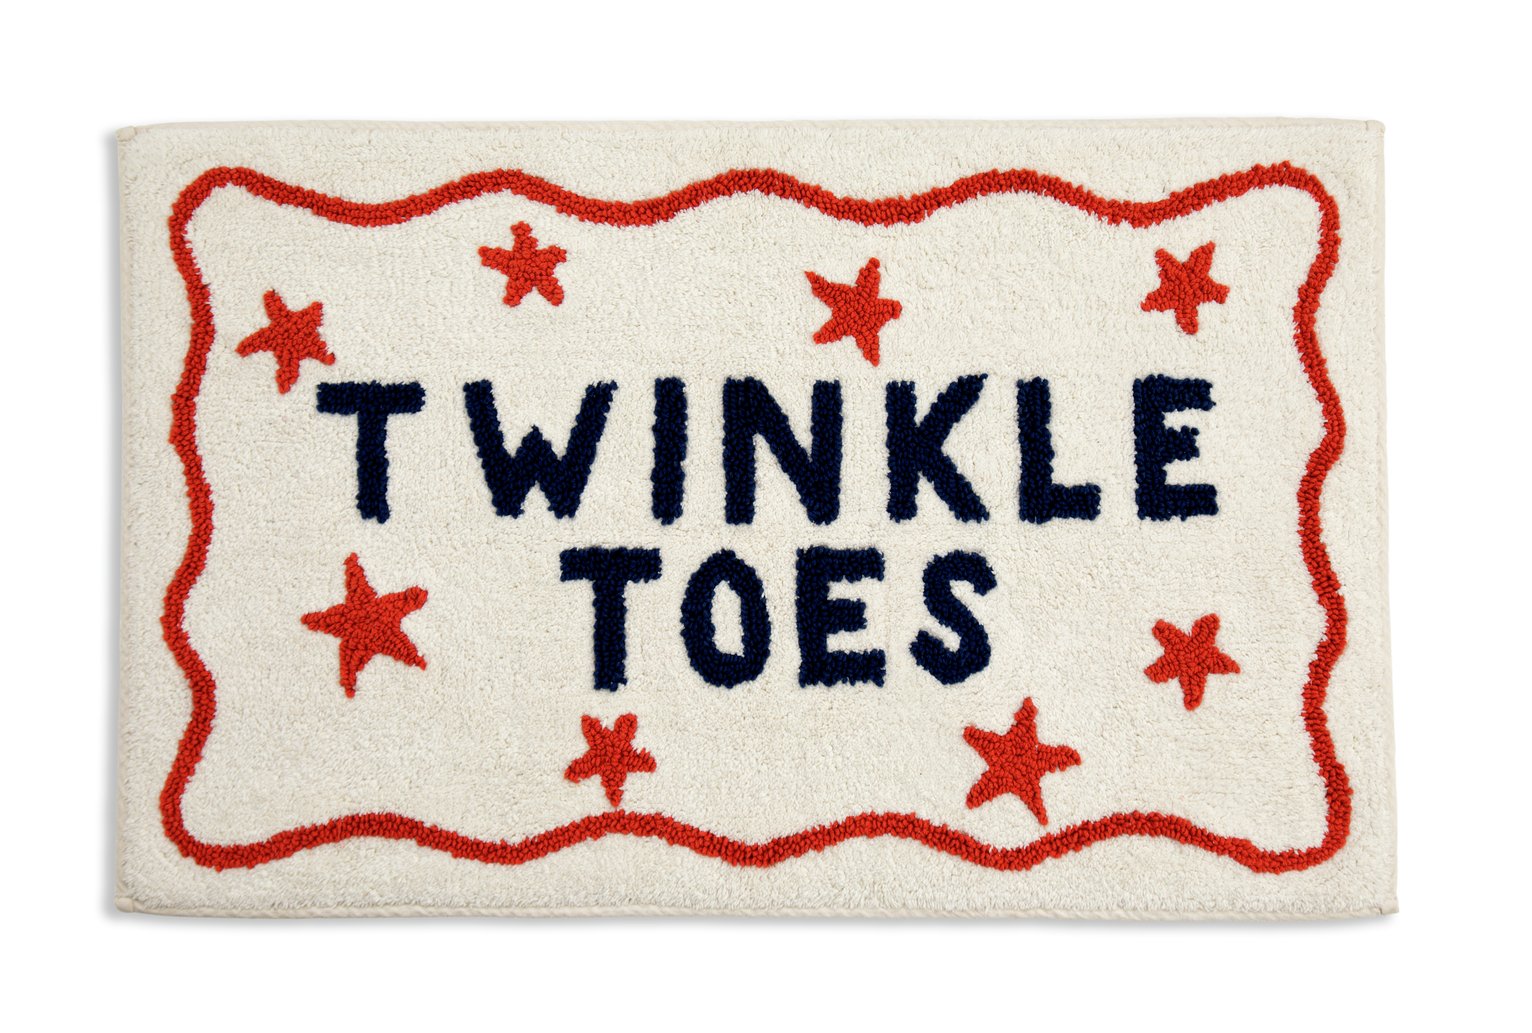 Habitat Cotton Tufted Twinkle Toes Bath Mat - White & Red